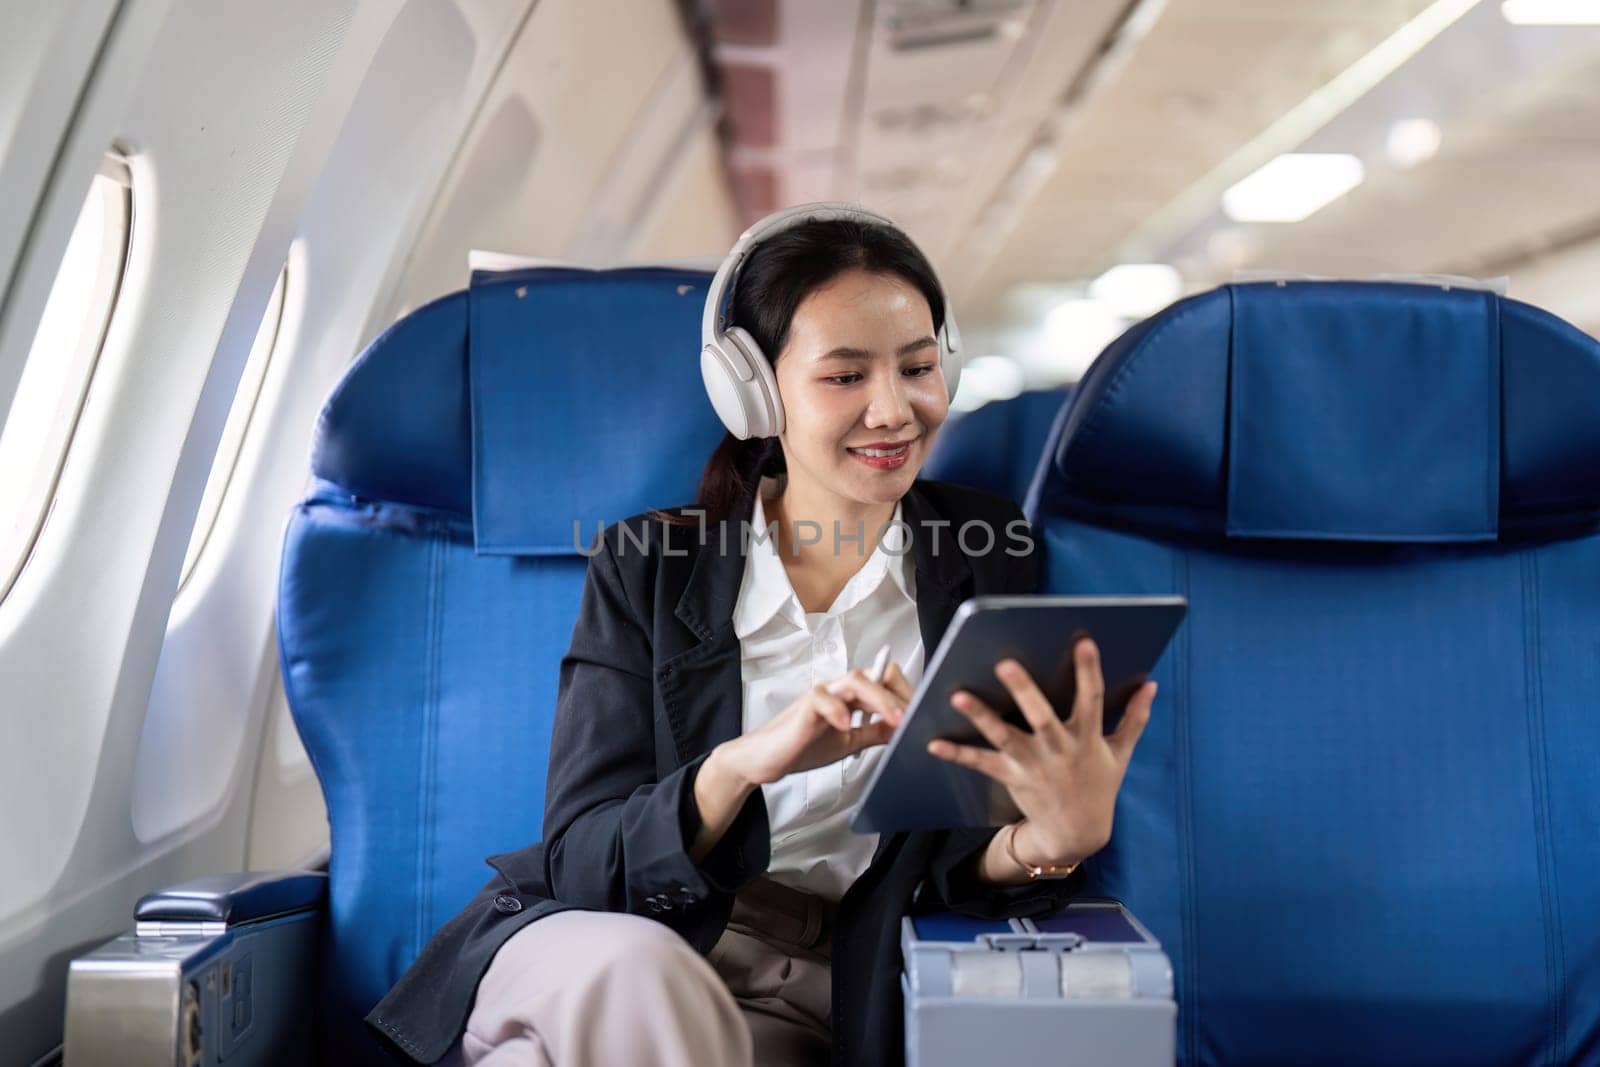 Businesswoman working on tablet during flight. Concept of business travel and technology.